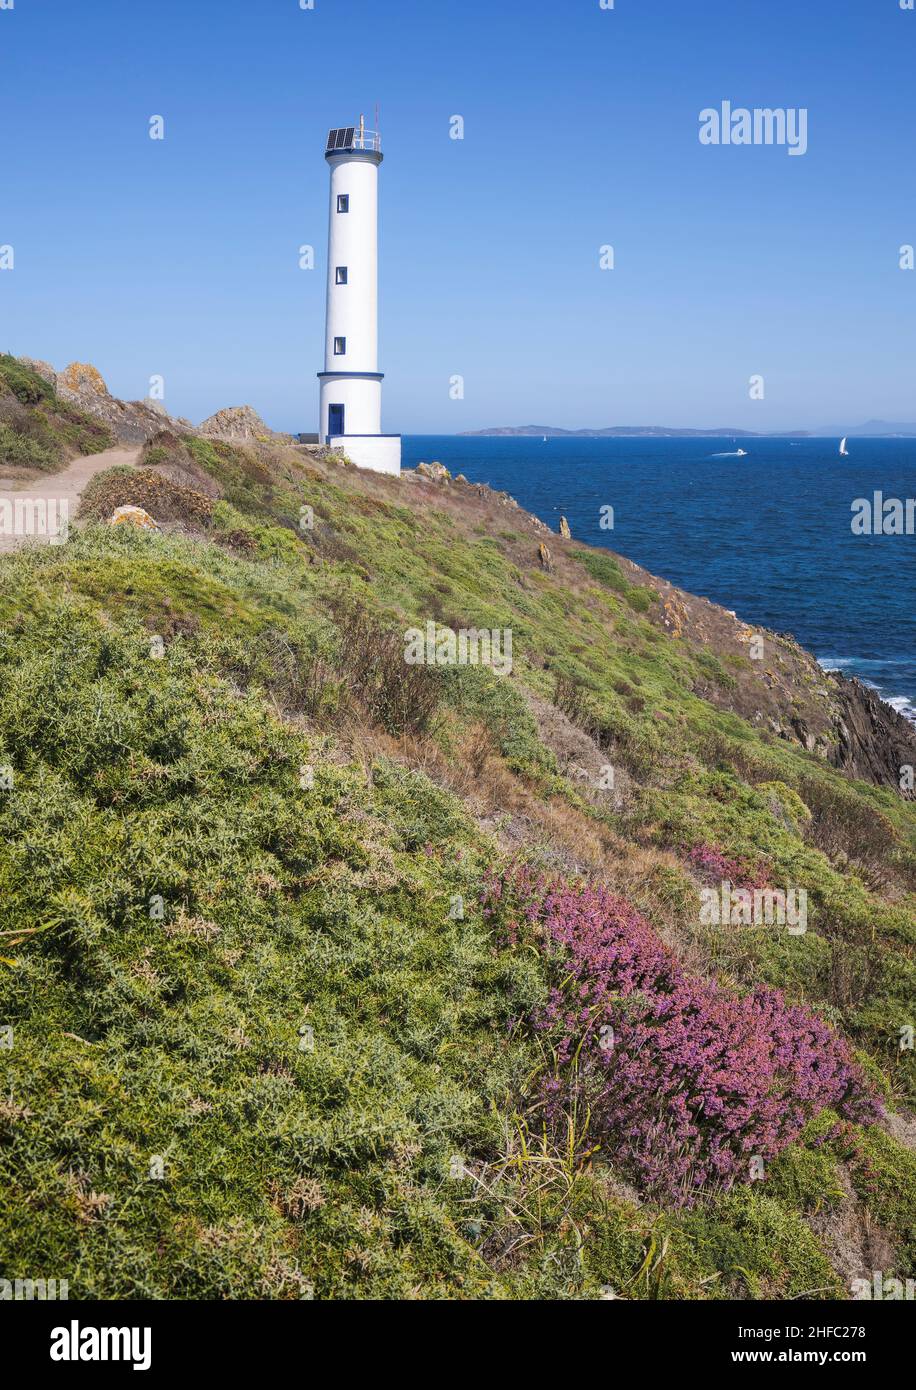 Cabo Home Lighthouse at Cangas, Galicia, Spain Stock Photo